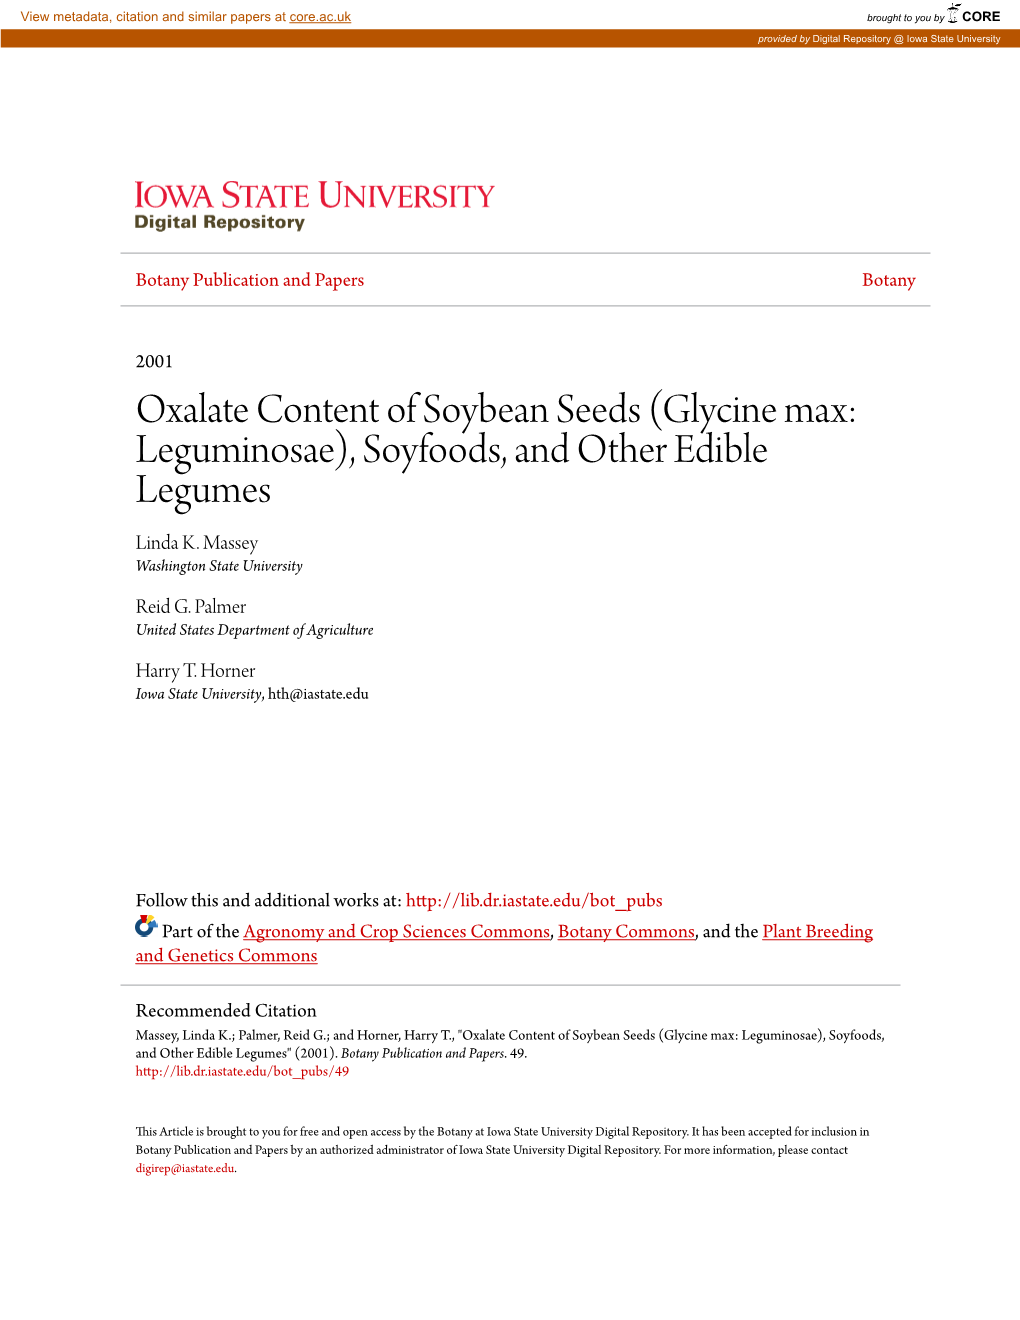 Oxalate Content of Soybean Seeds (Glycine Max: Leguminosae), Soyfoods, and Other Edible Legumes Linda K